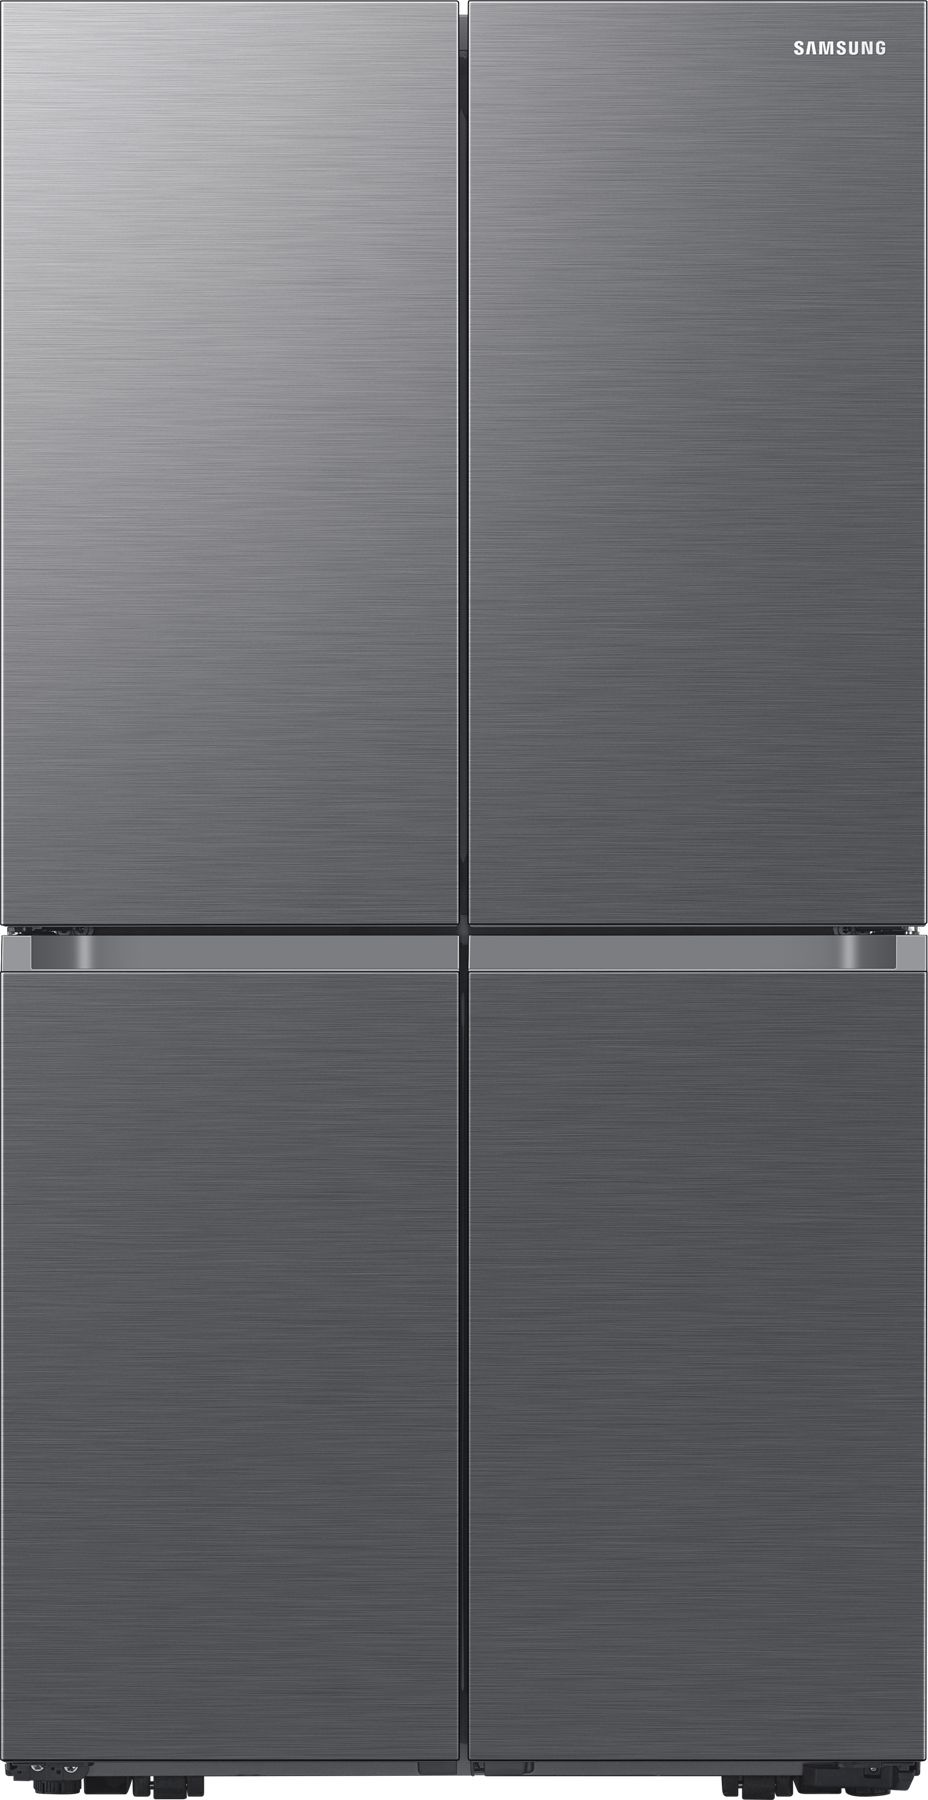 Samsung RF59C70TES9 Wifi Connected American Fridge Freezer - Stainless Steel - E Rated, Stainless Steel